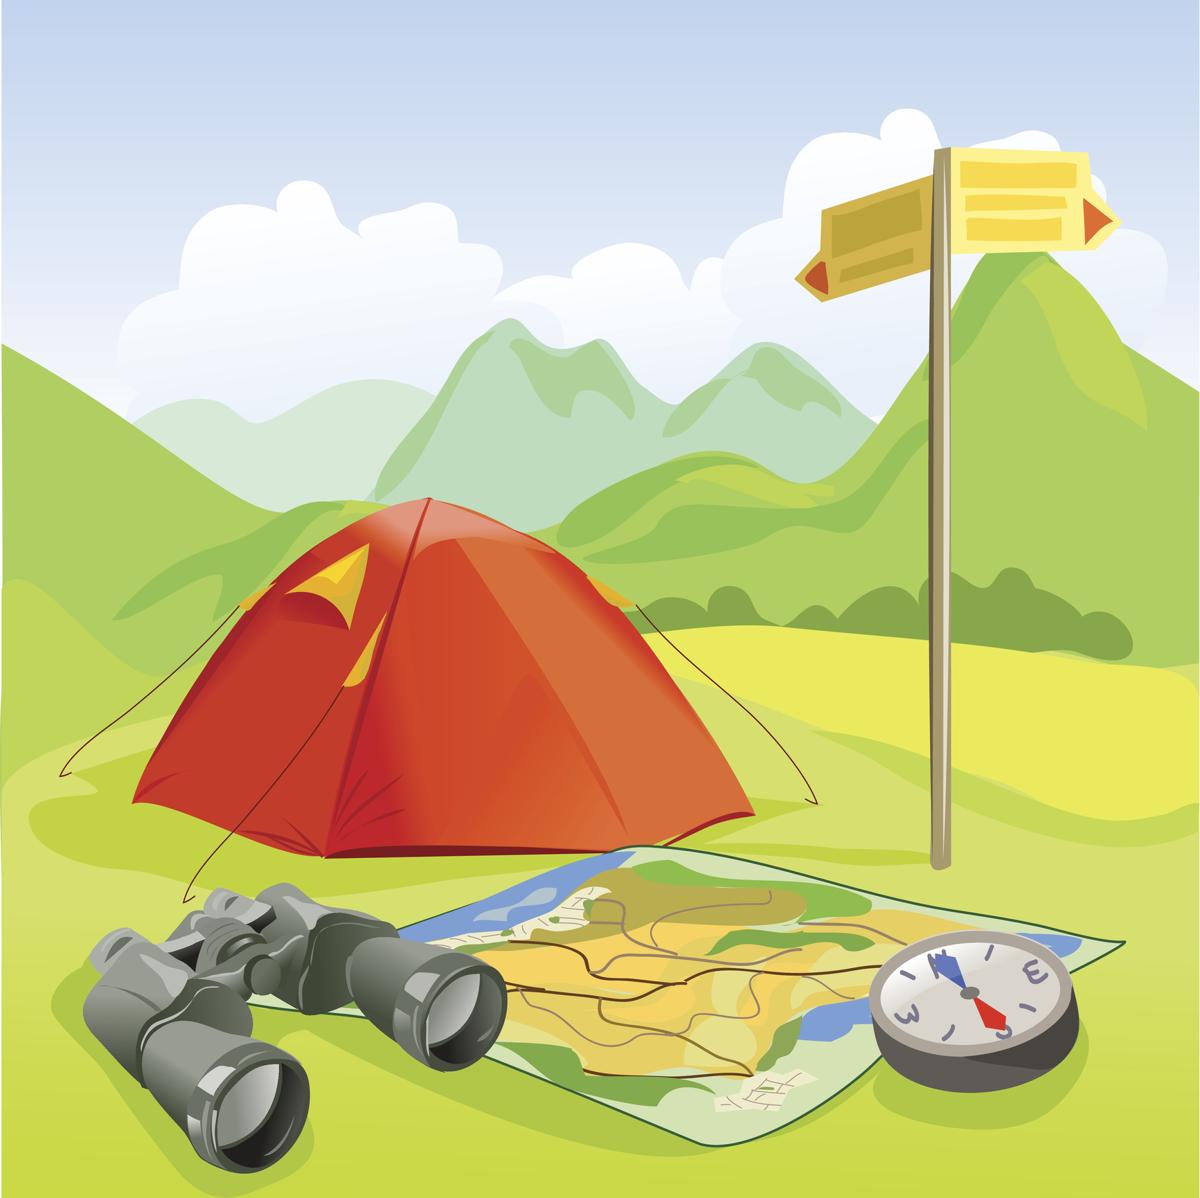 Camping Checklist - Essentials for Camping